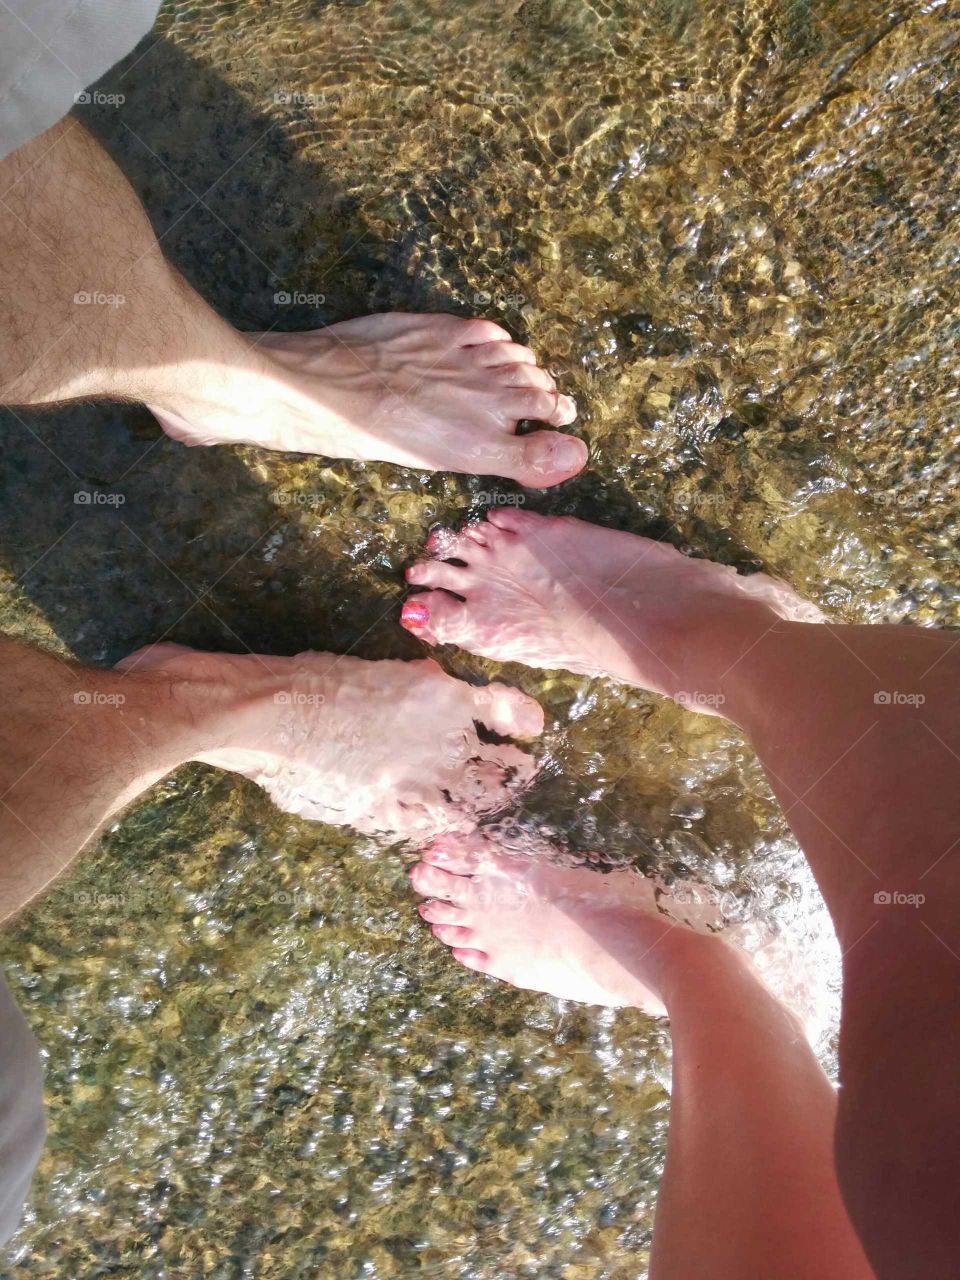 feet in the water